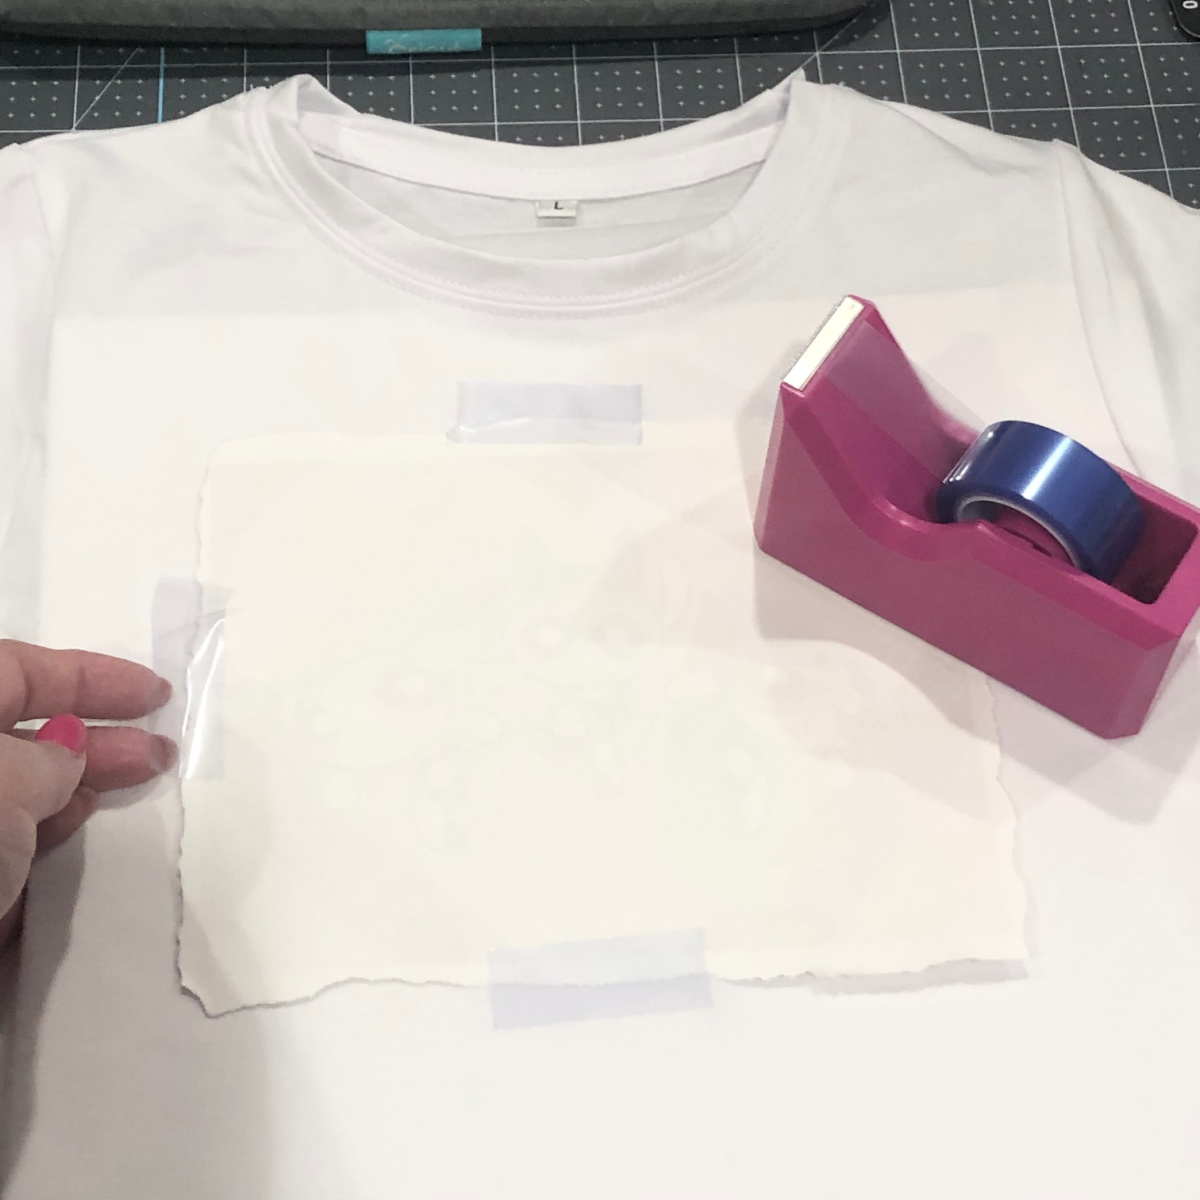 white Cricut sublimation shirt with sublimation print face down on shirt with heat resistant tape and dispenser